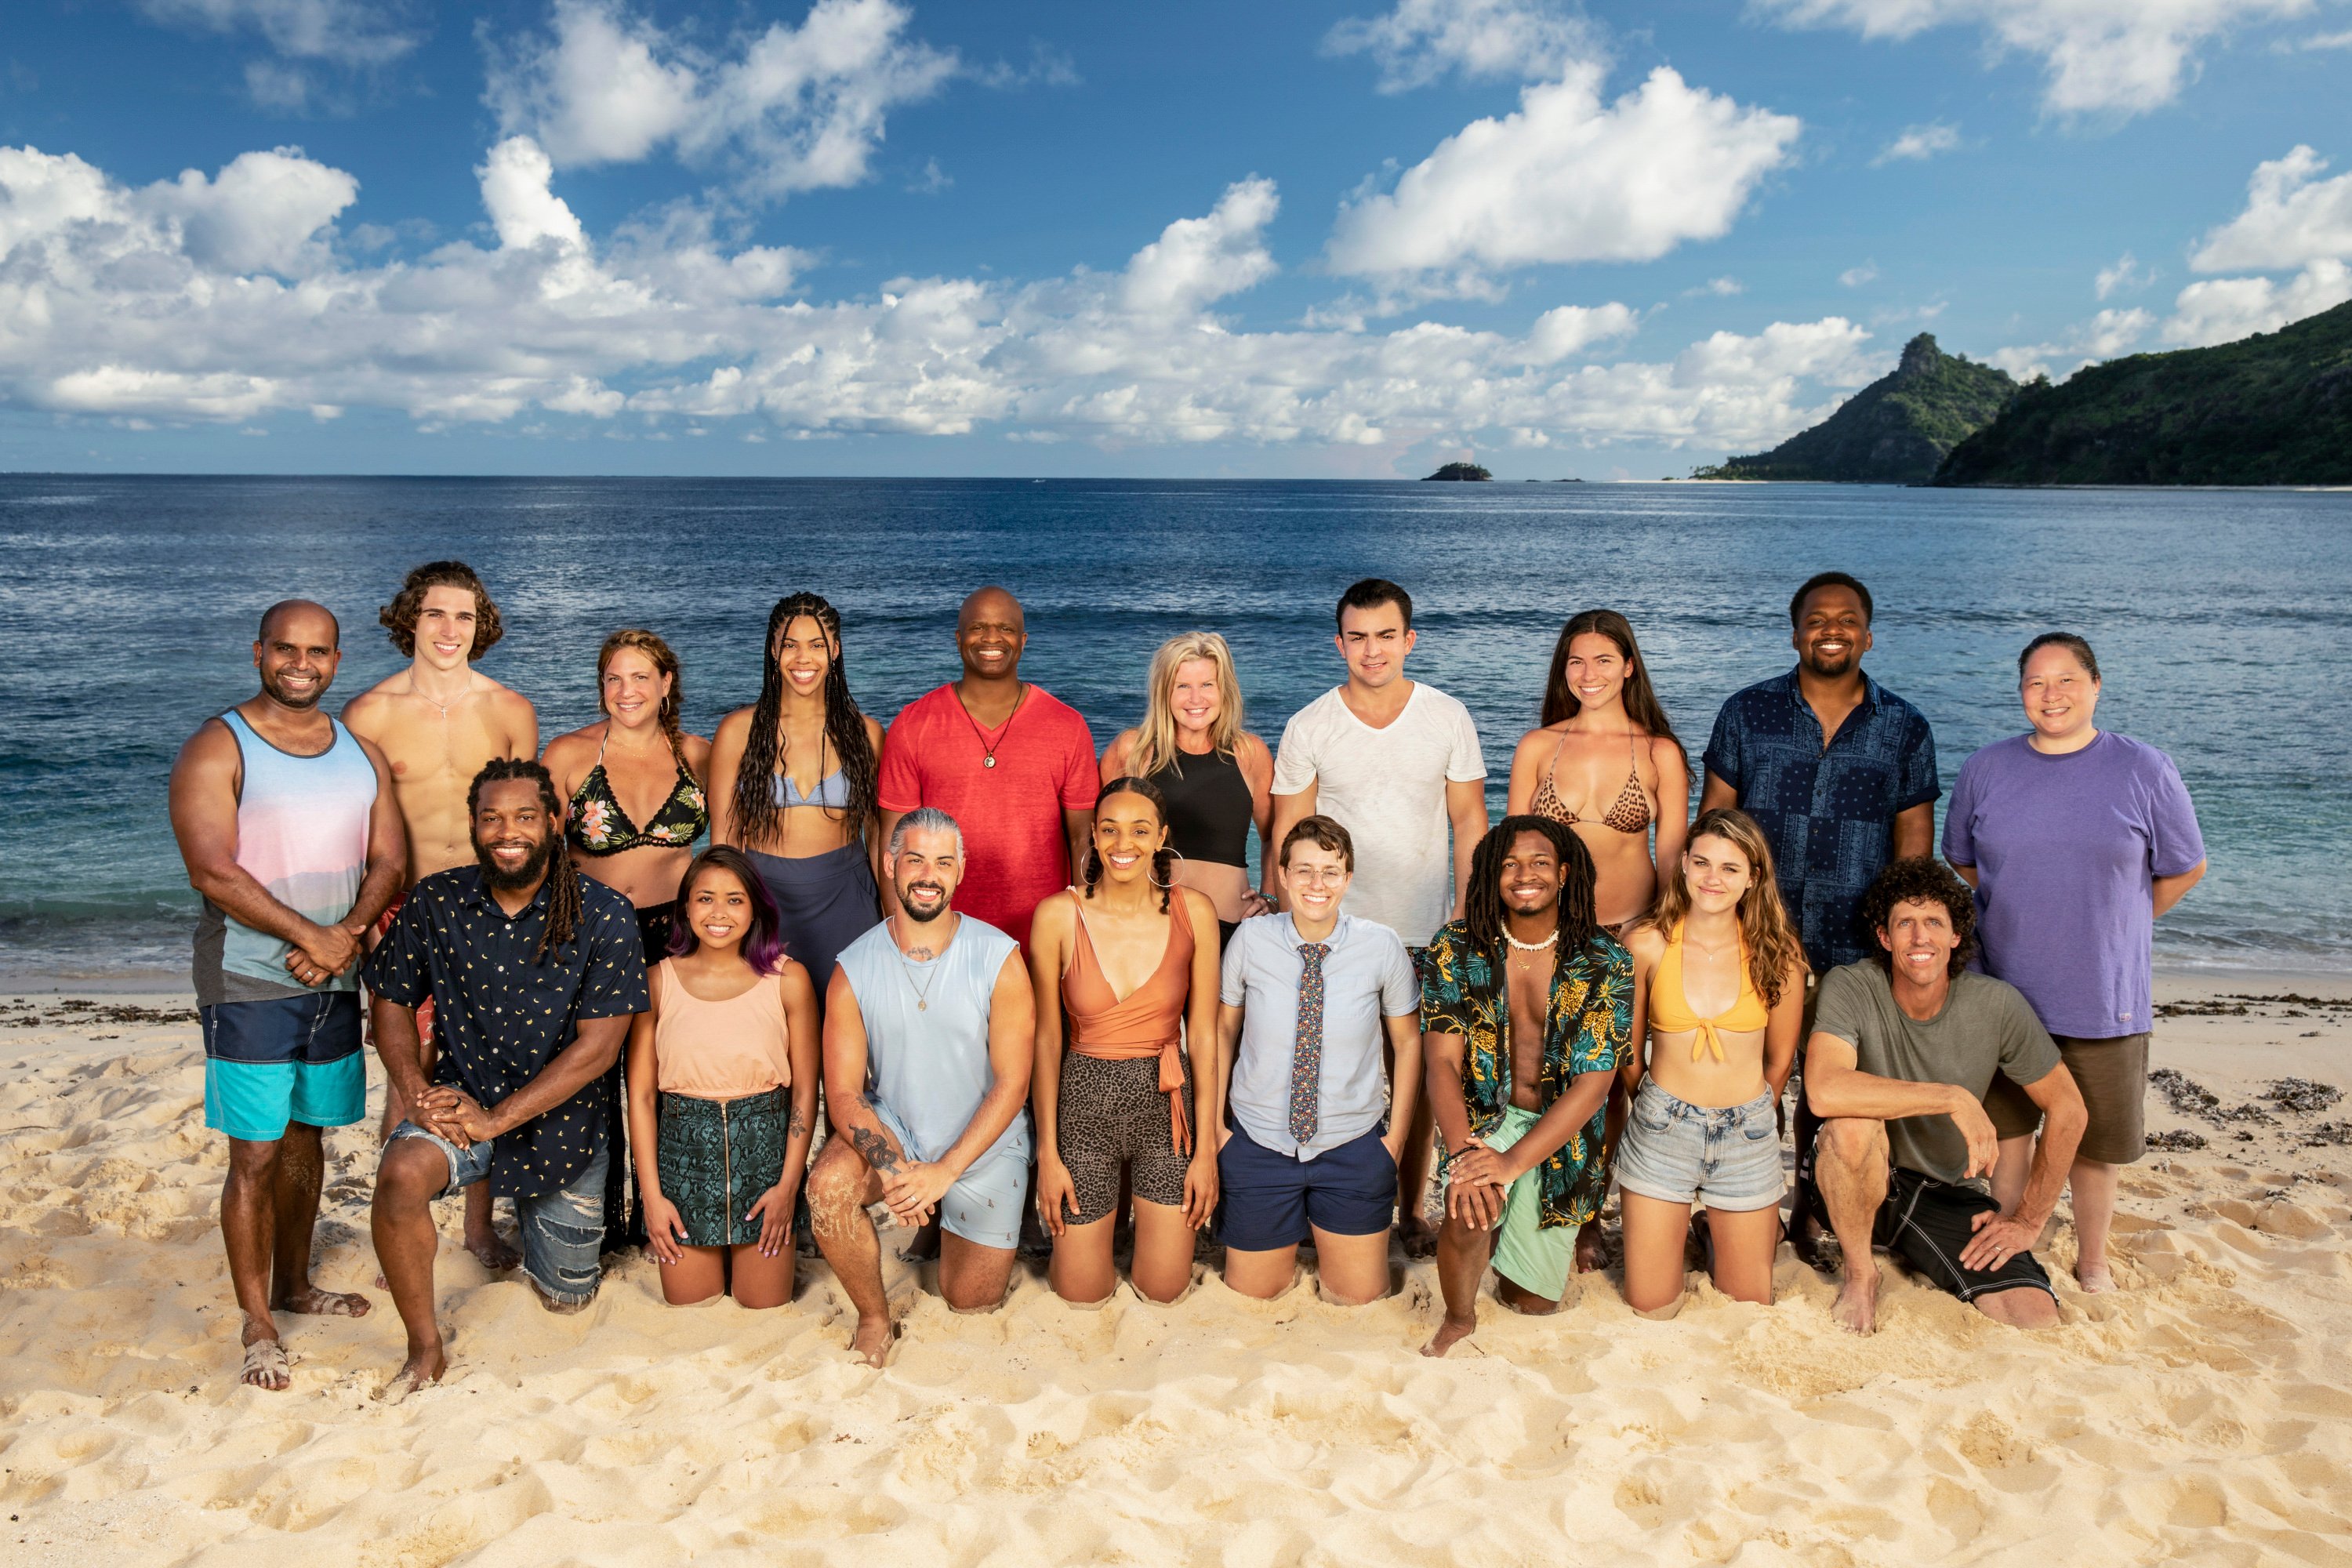 'Survivor' Season 41 cast posing for a group picture on the beach